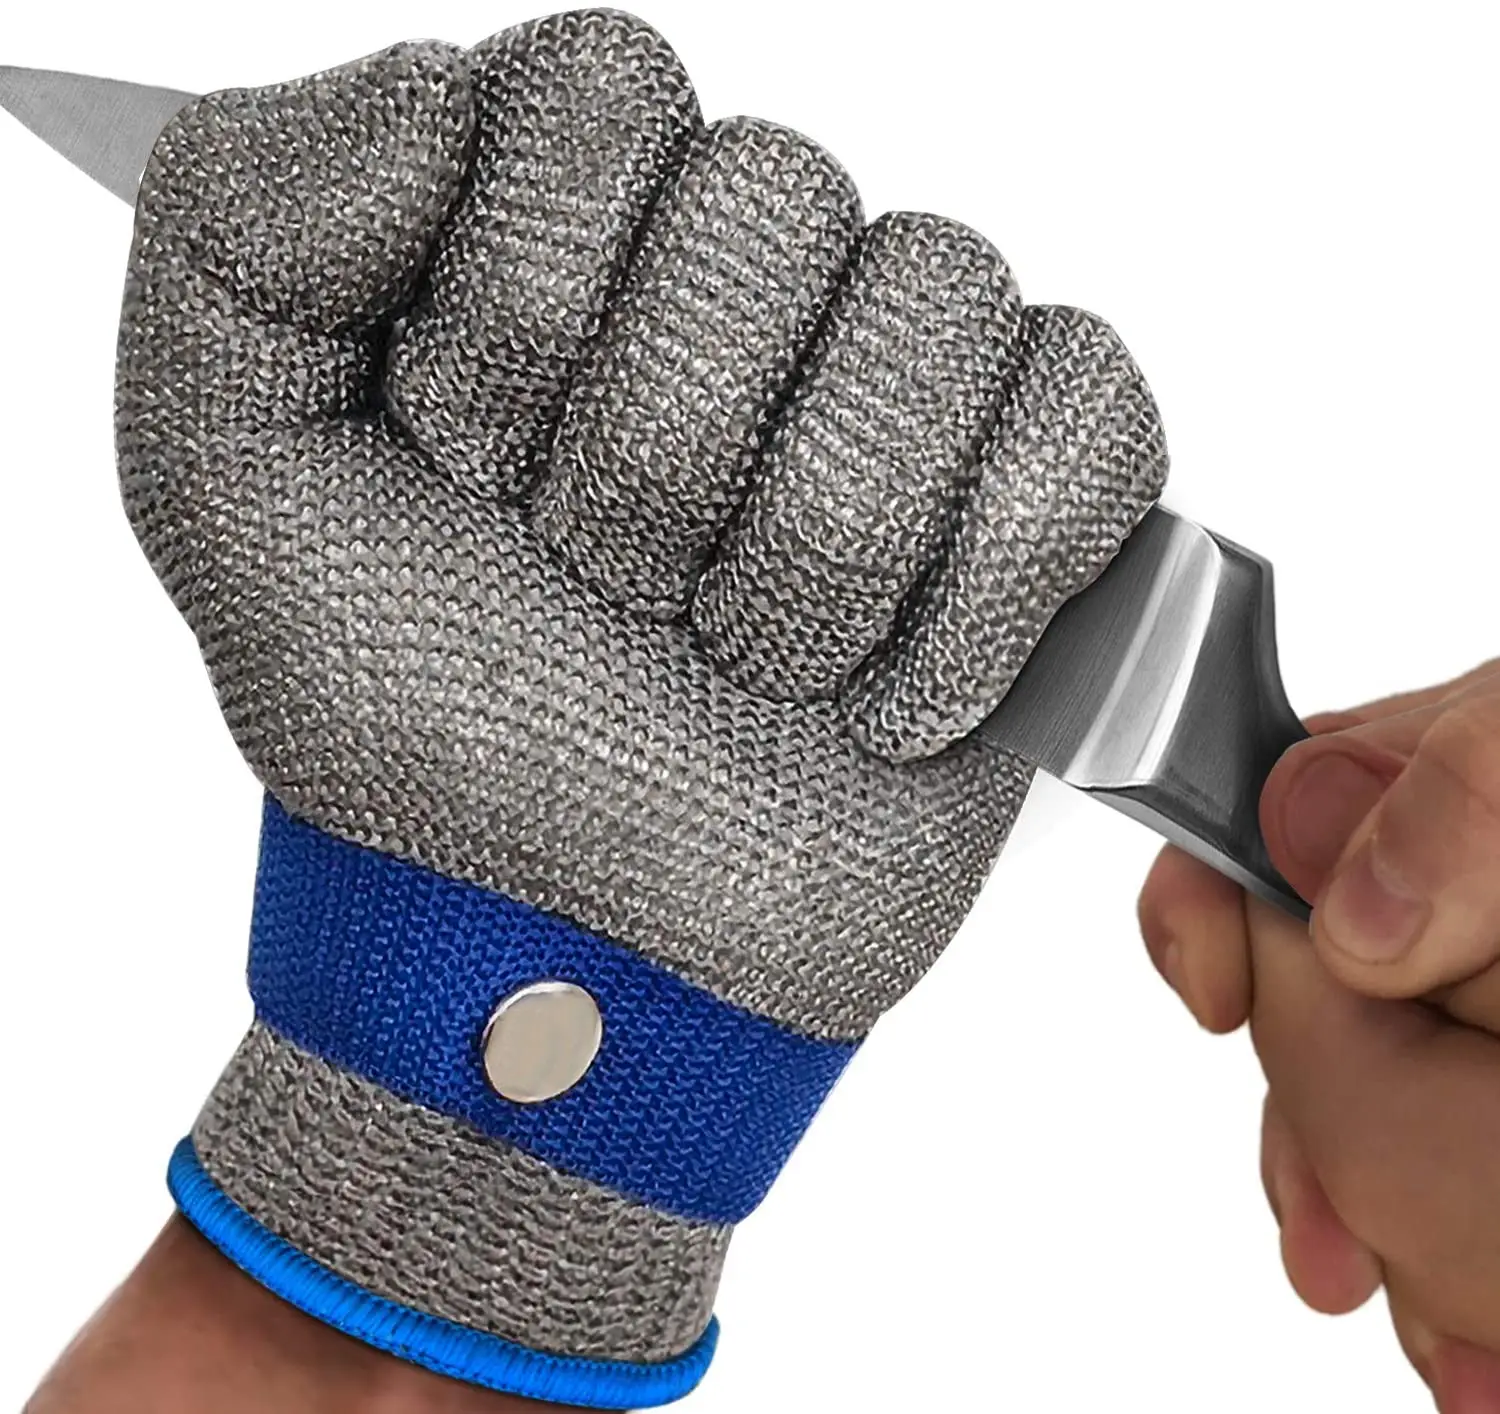 Source High Quality Stainless Steel Metal Safety Cut Proof Stab Butcher guantes de carnicero on m.alibaba.com